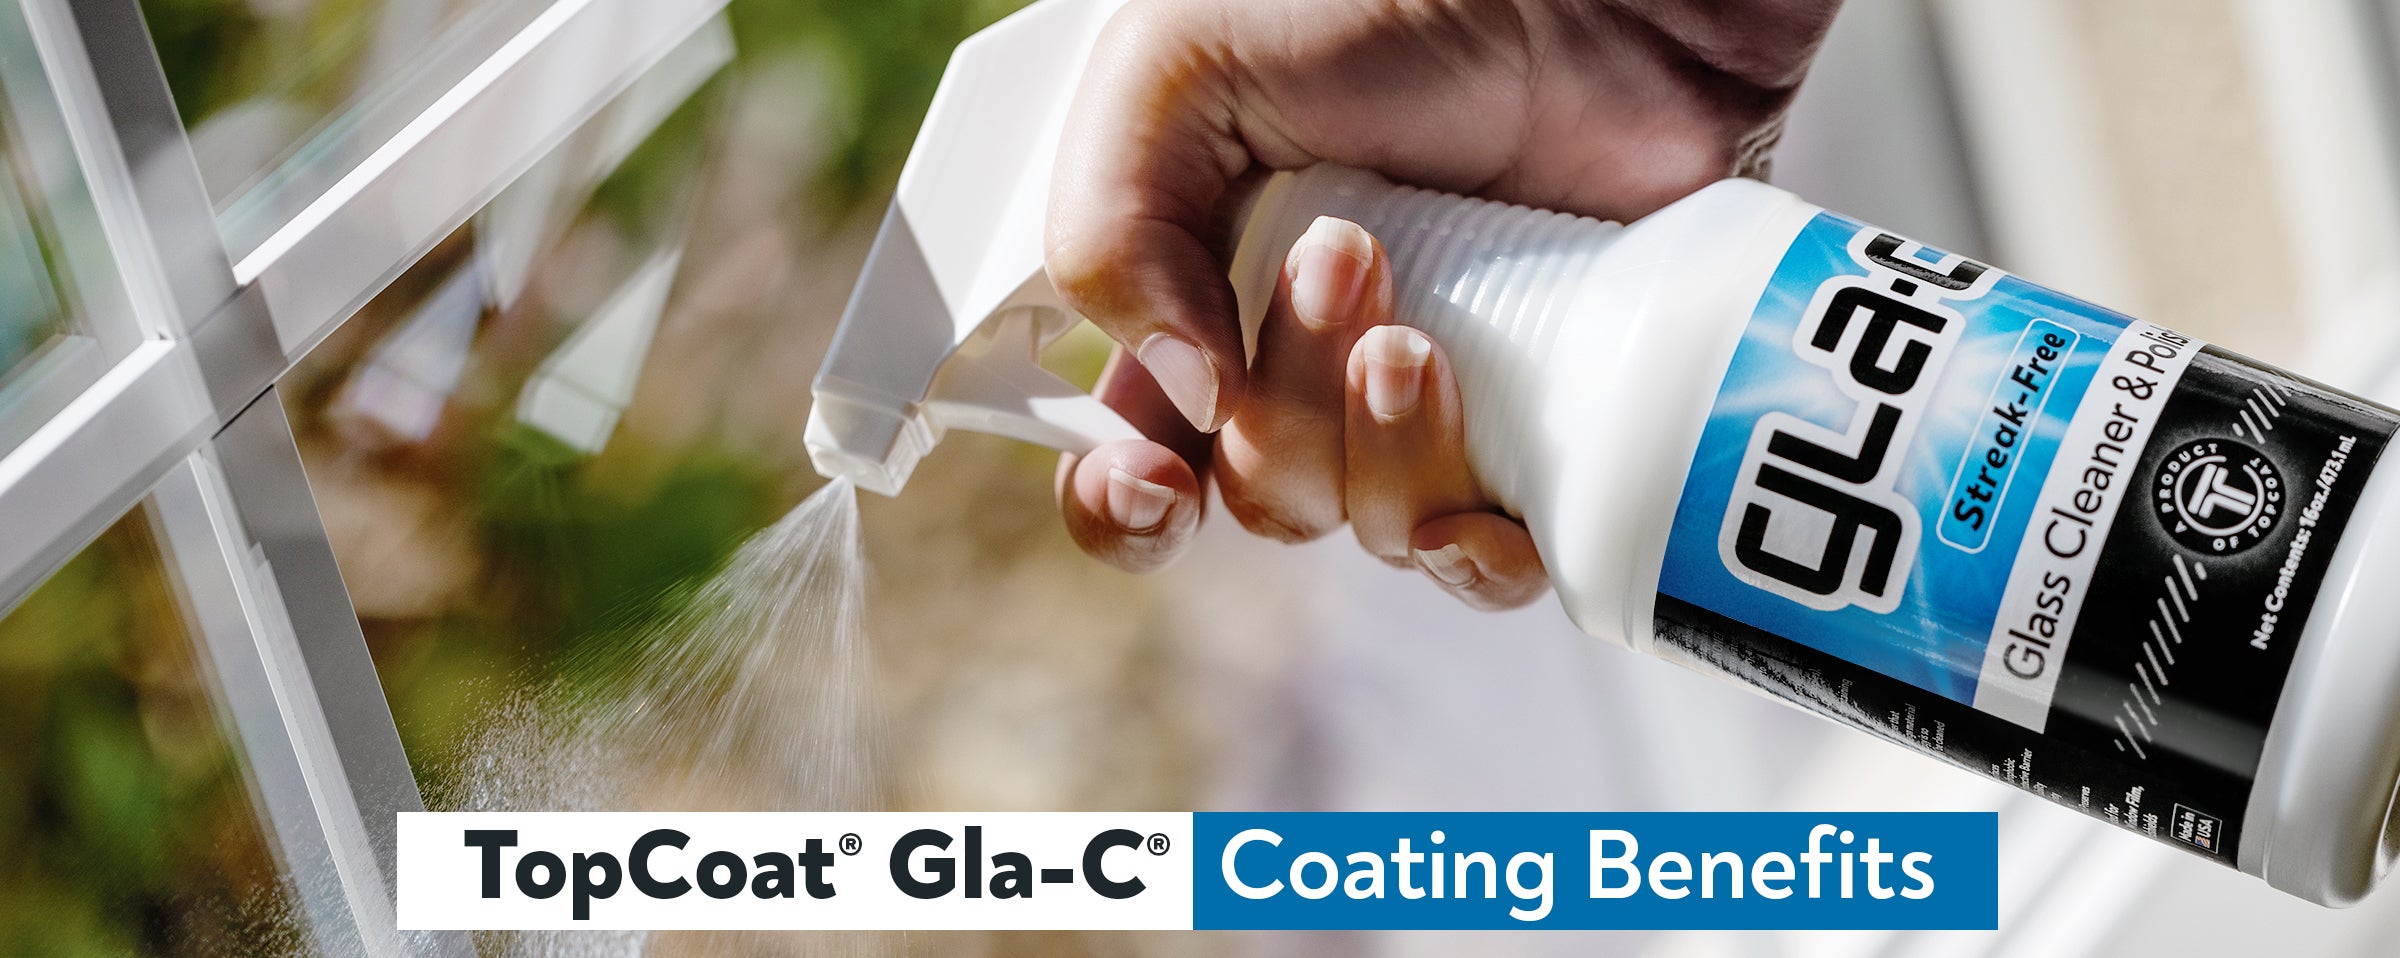 How to Use TopCoat® Gla-C® and the Benefits of Using a Glass Maintenance Coating